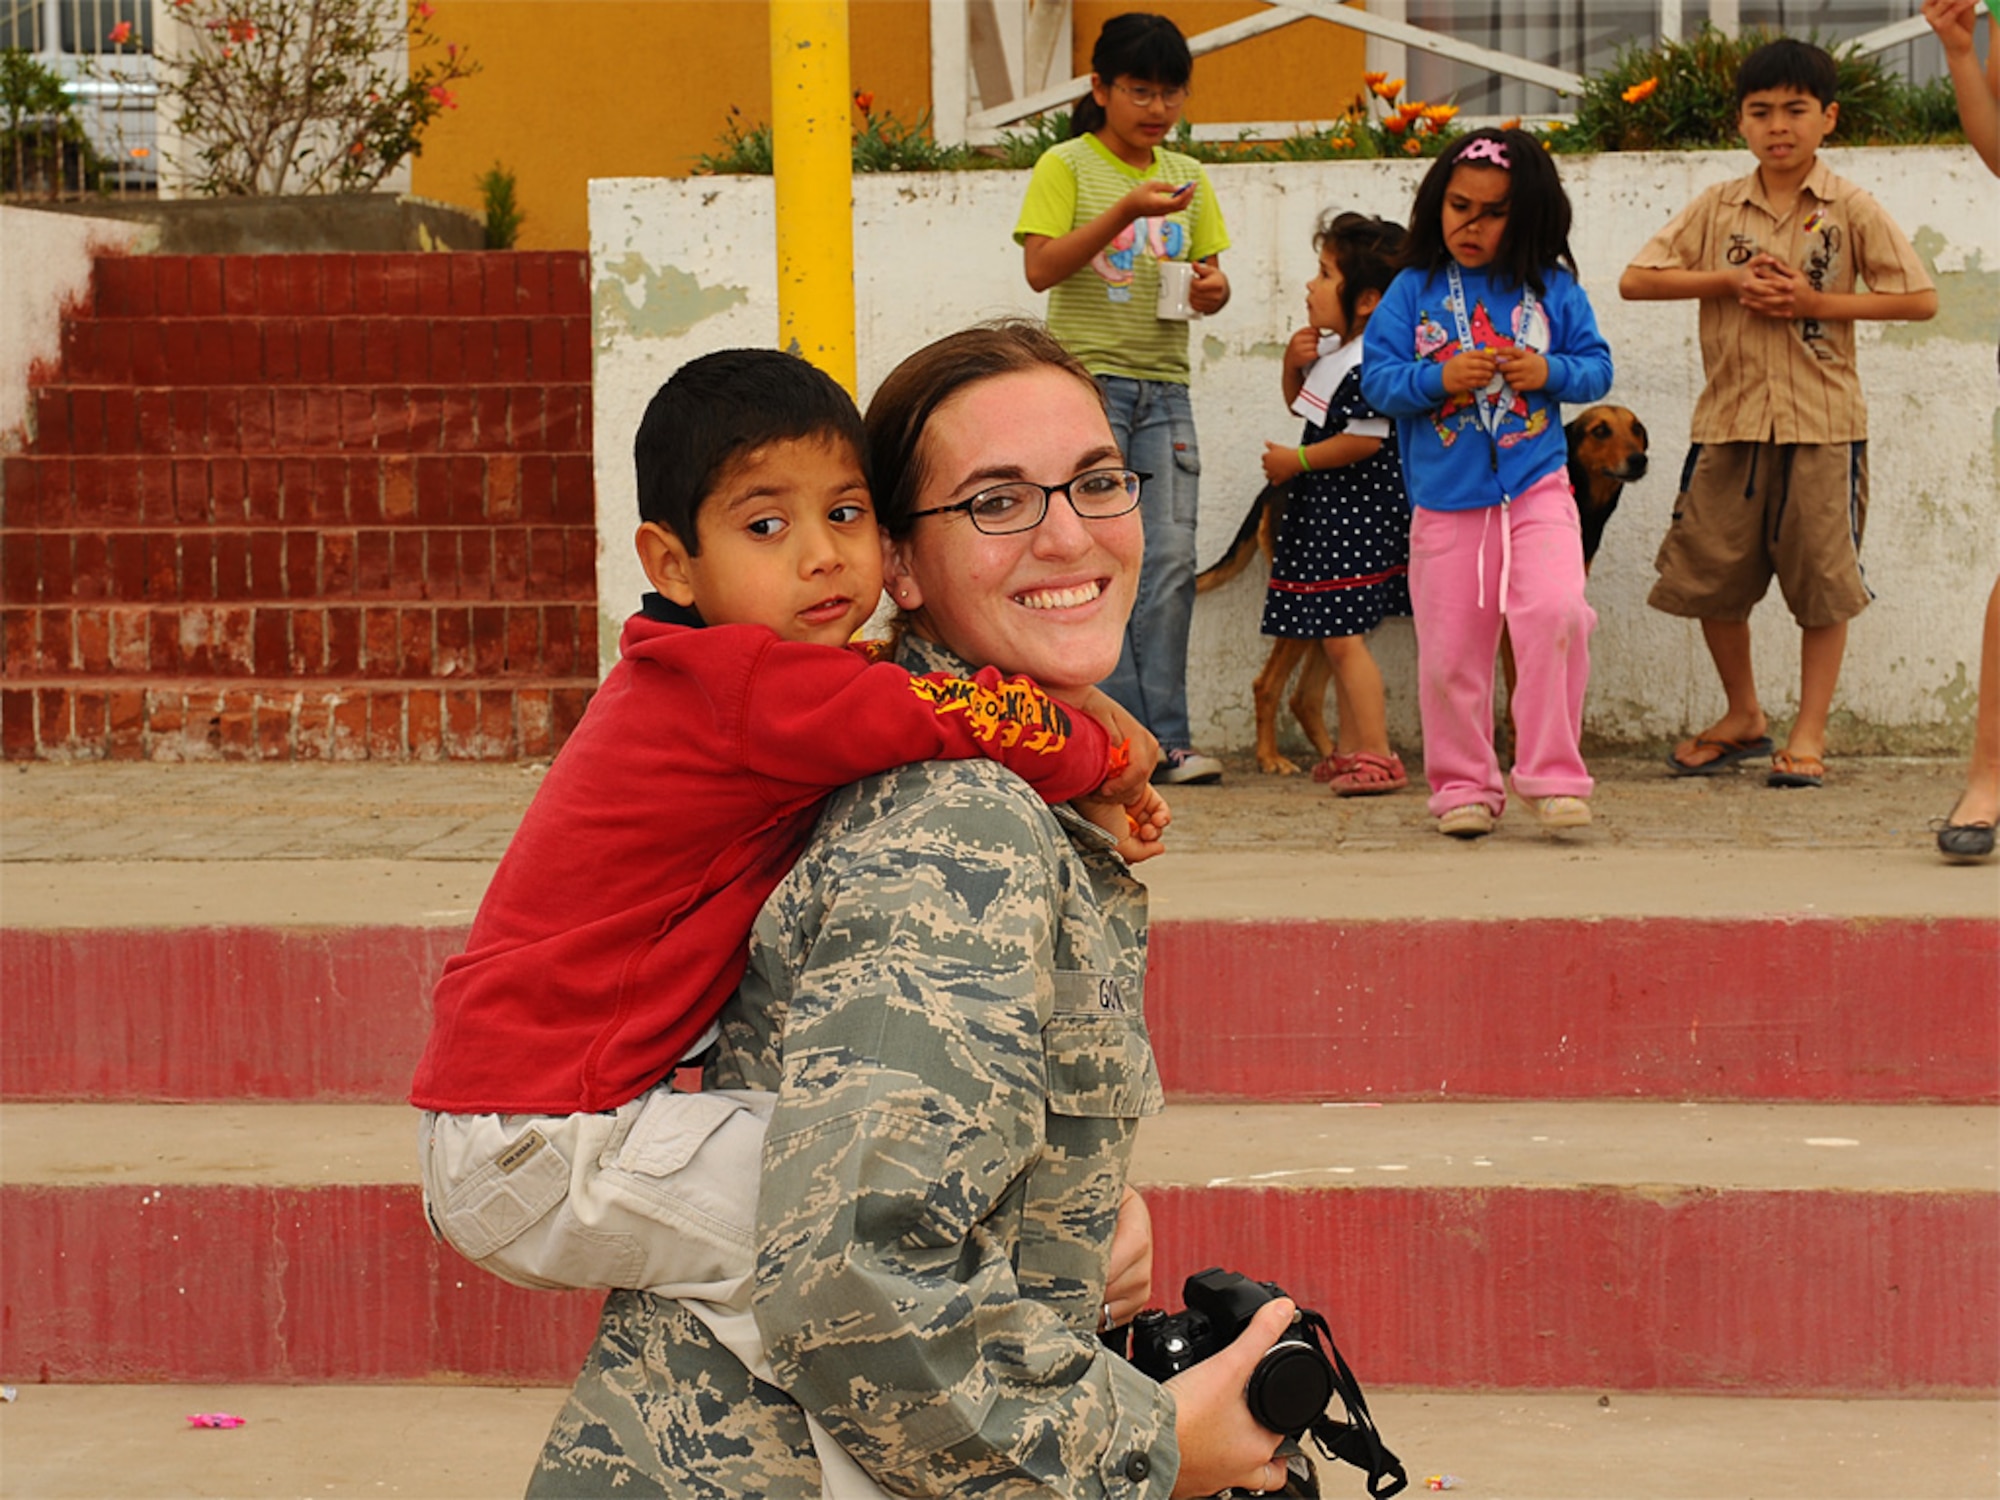 Capt Nicole Golden, 355th Fighter Wing Chief of Intel Operations, gives a piggyback ride to a child at the Aldeas SOS orphanage in Antofagasta, Chile on Sunday.  Capt Golden was one of more than 40 Airmen from the US, Chilean and Argentine Air Forces who visited the home while taking time off from exercise SALITRE, a five-nation exercise focused on peacekeeping operations.   (U.S. Air Force photo by Master Sgt. Daniel Farrell)